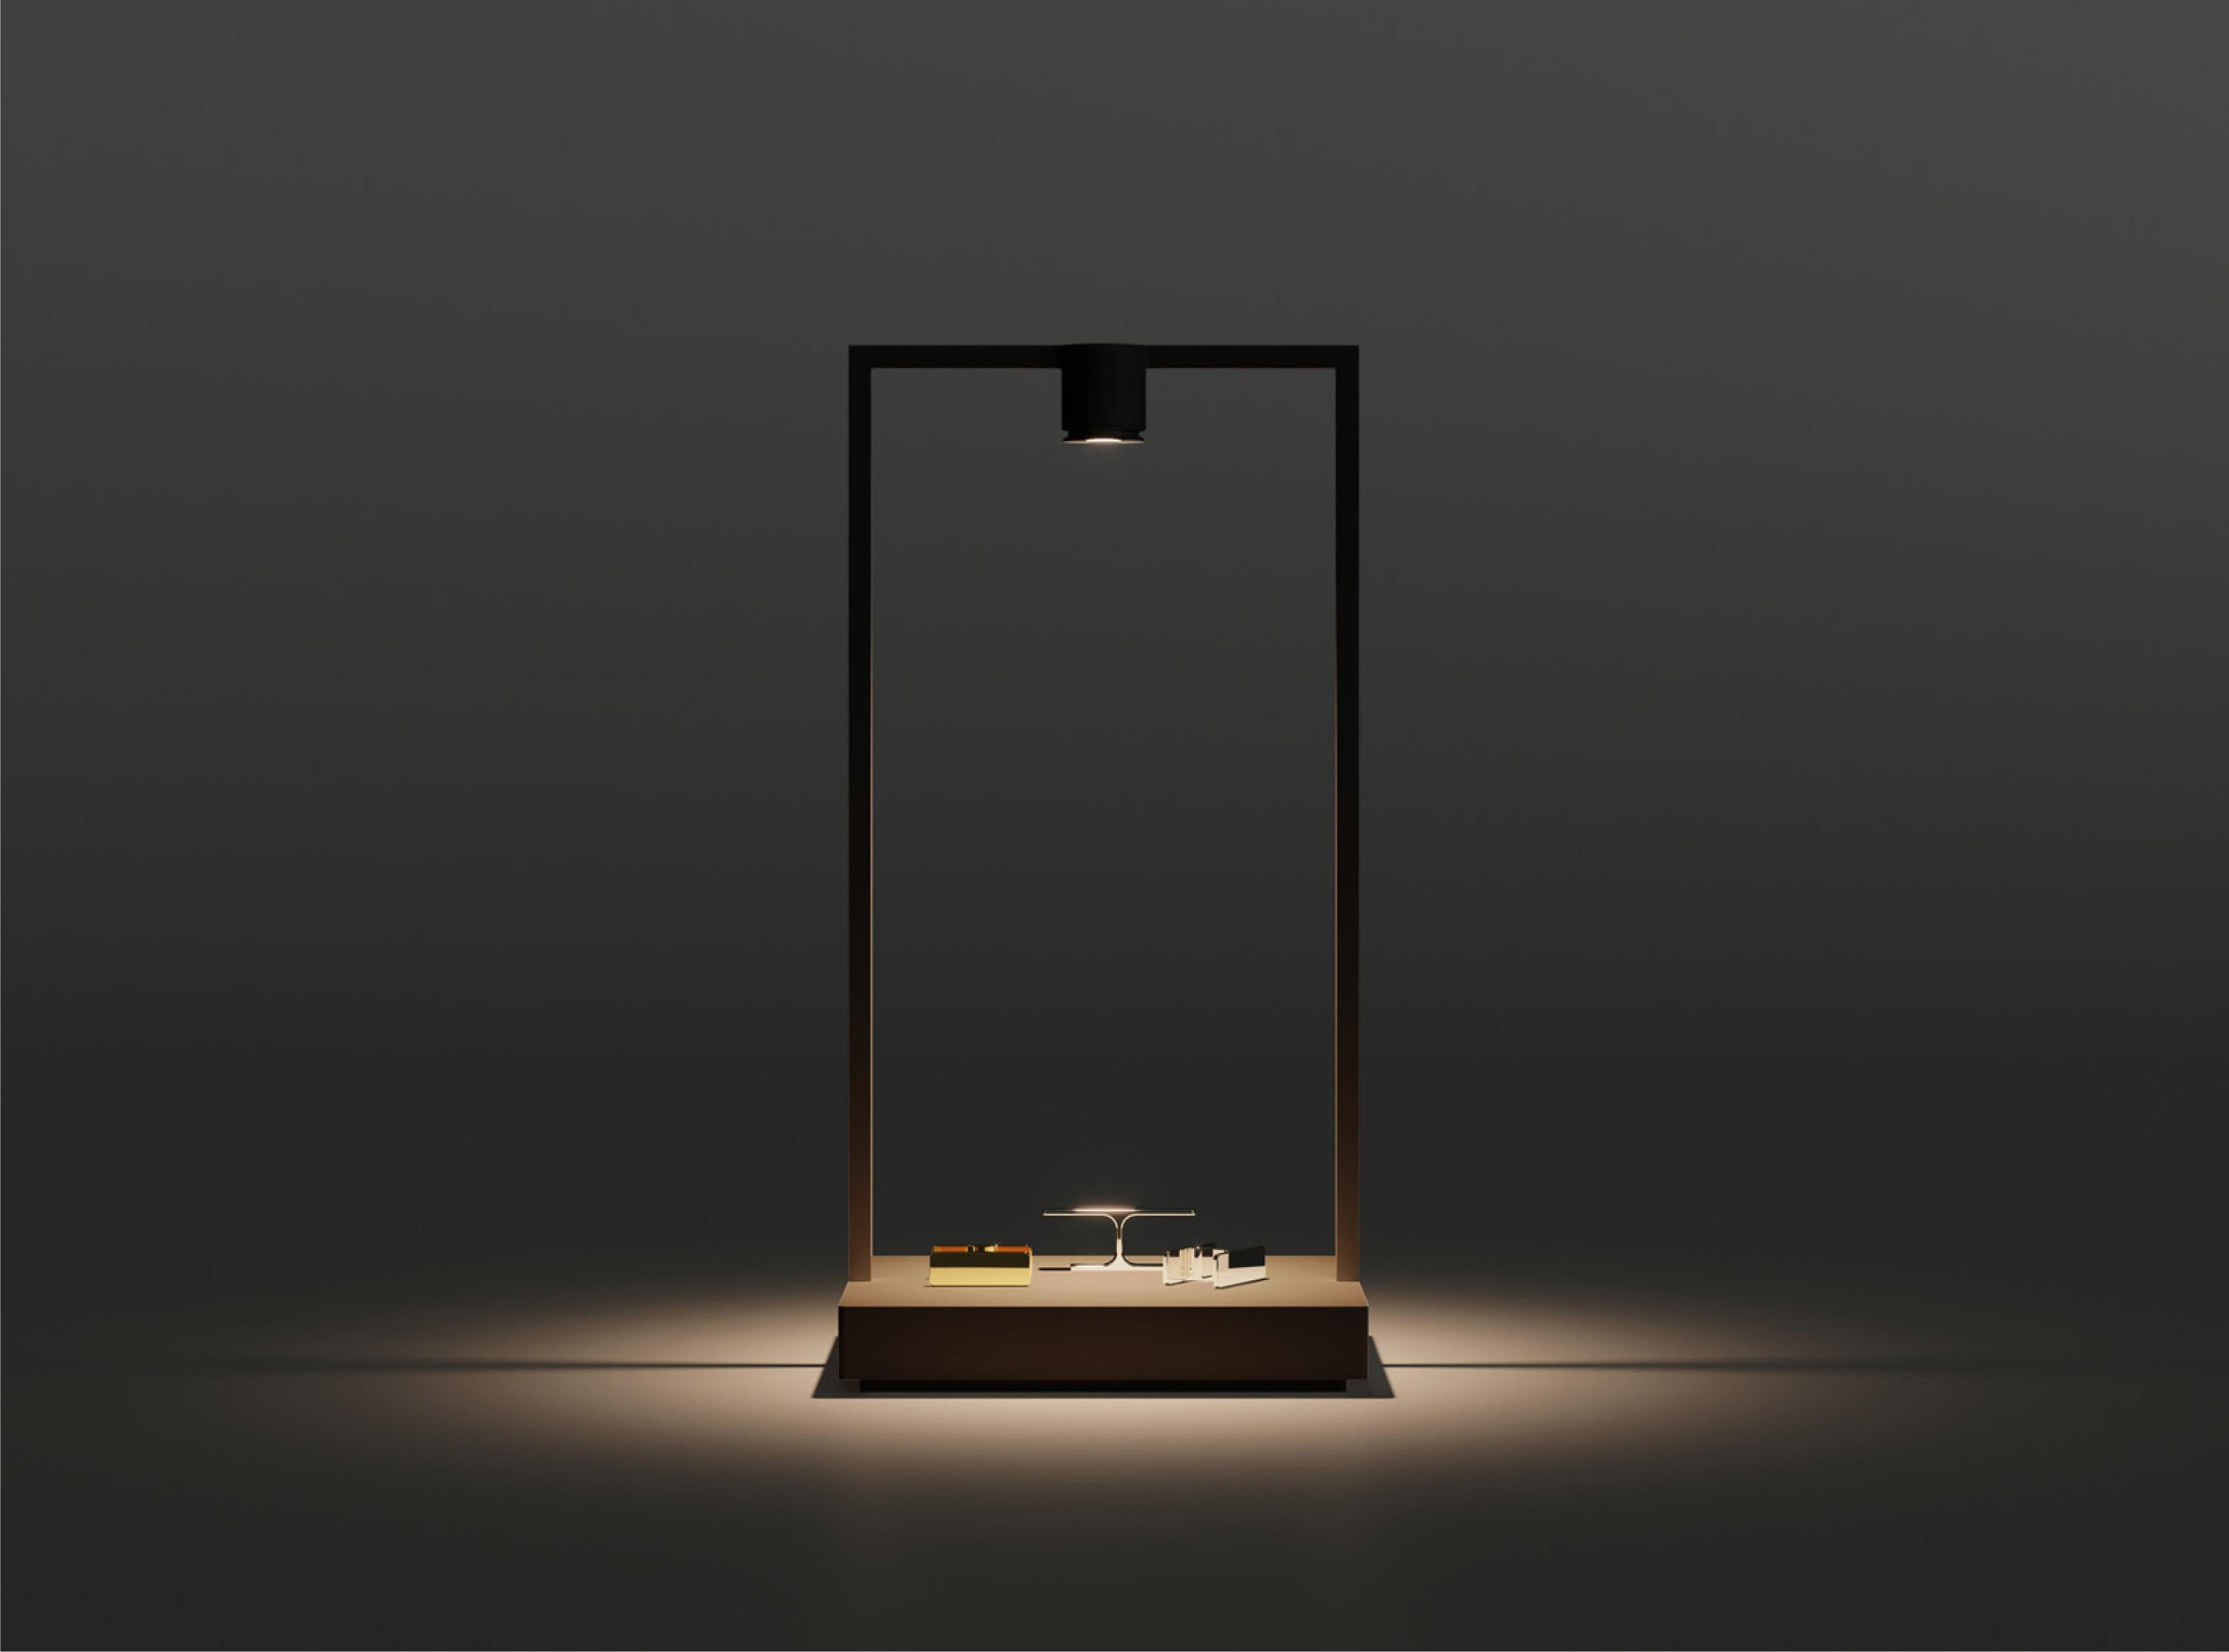 Curiosity is a new portable lamp that functions not only as a work of art, but also as a spotlight to showcase the spaces we live in or the objects that can be housed inside it. Curiosity can bring its space of light everywhere, making it ideal for